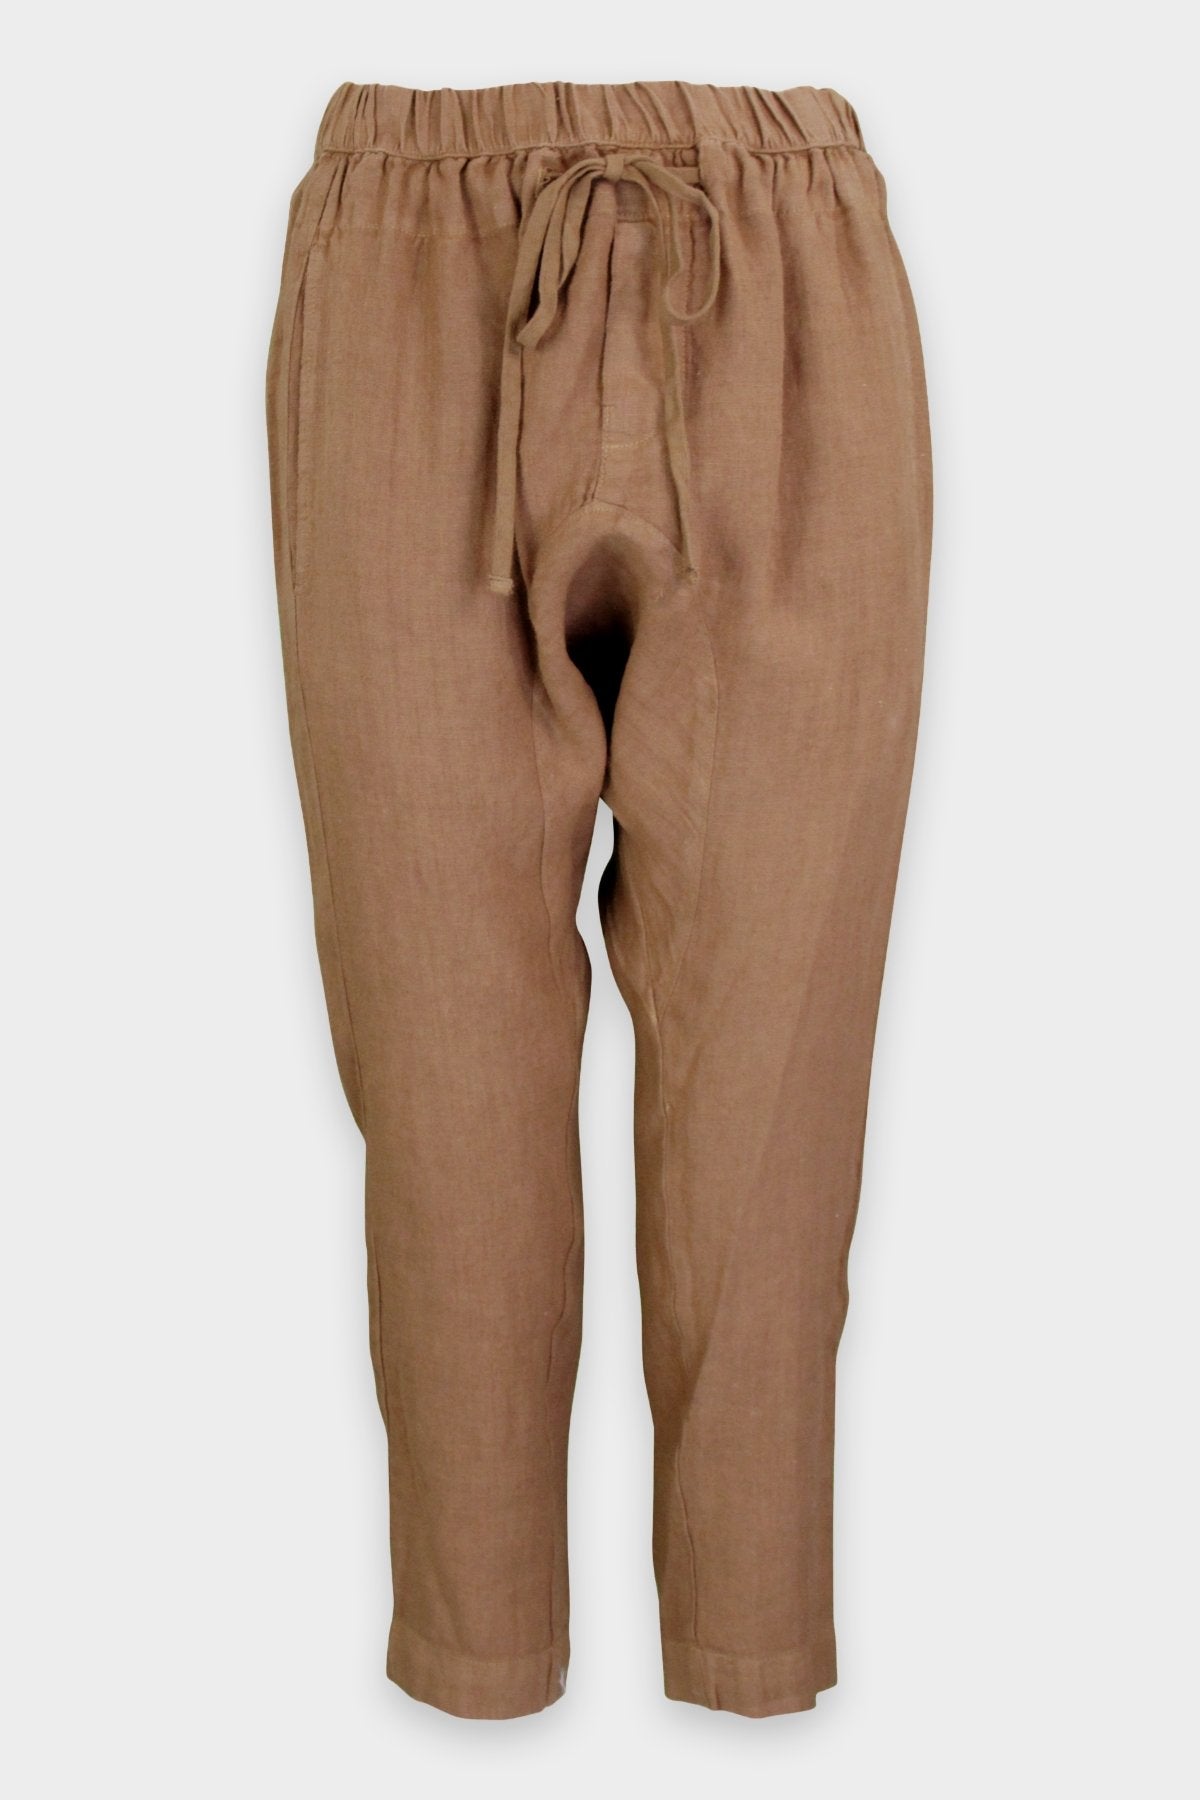 Linen Drawcord Droprise Pant in Brown - shop-olivia.com